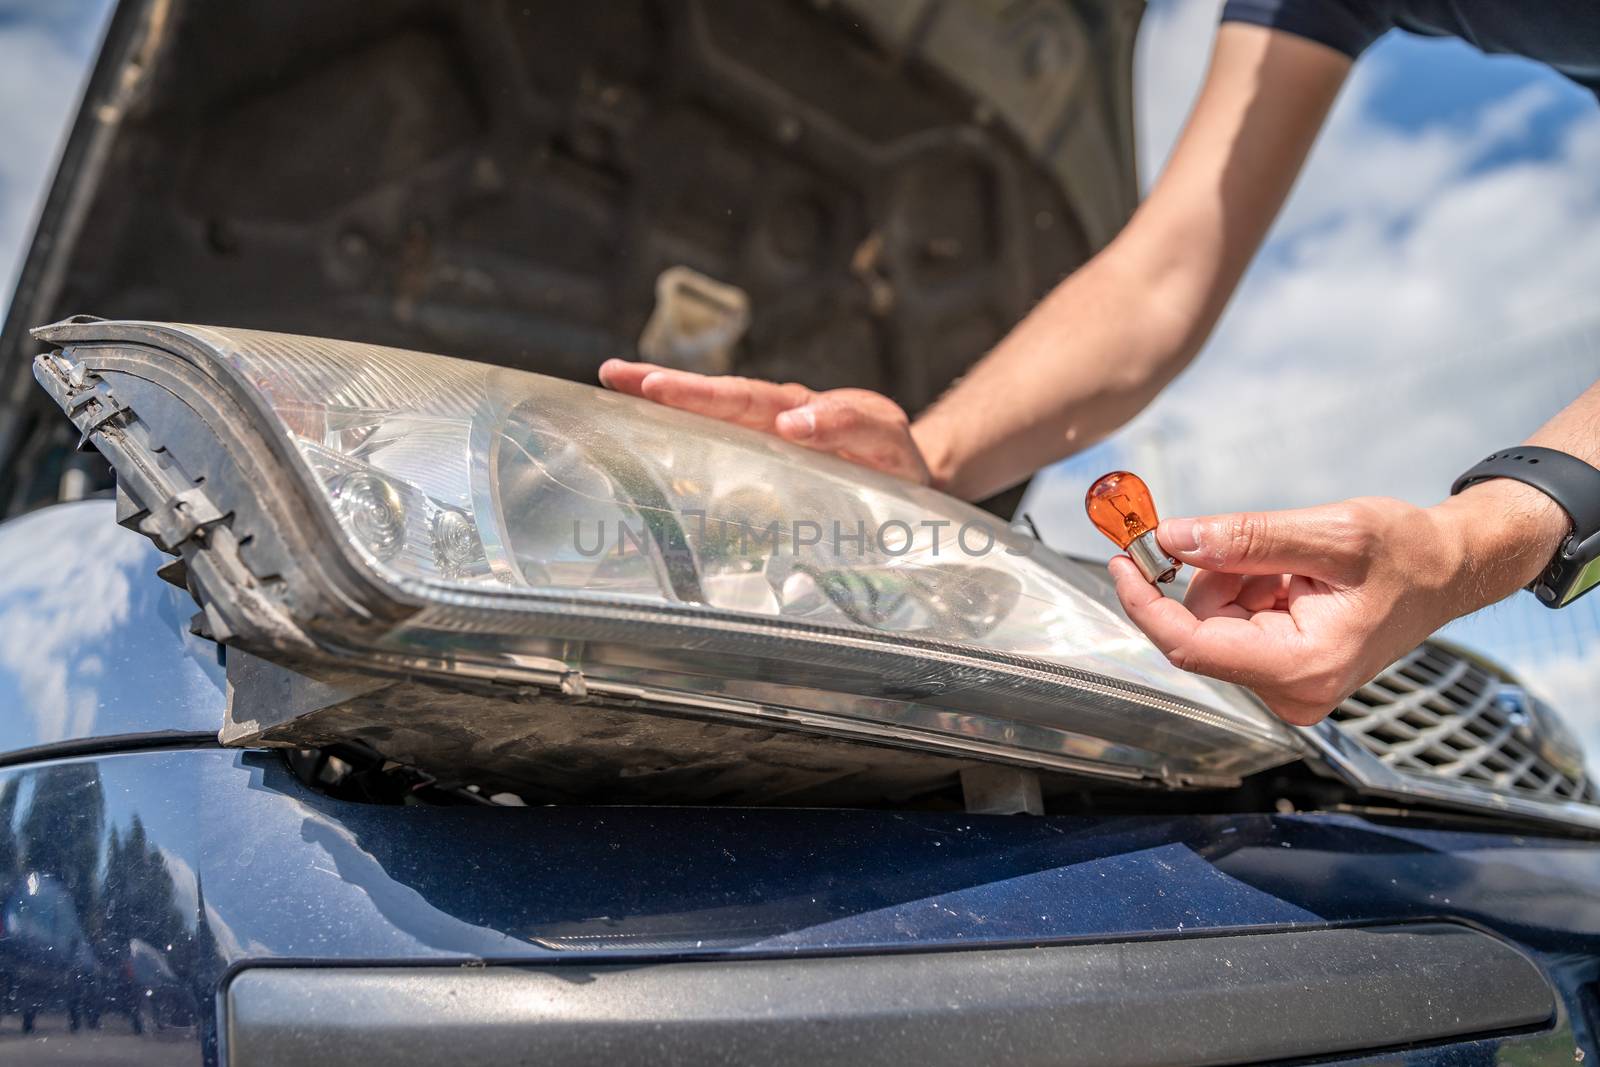 bulb replacement in the car headlight